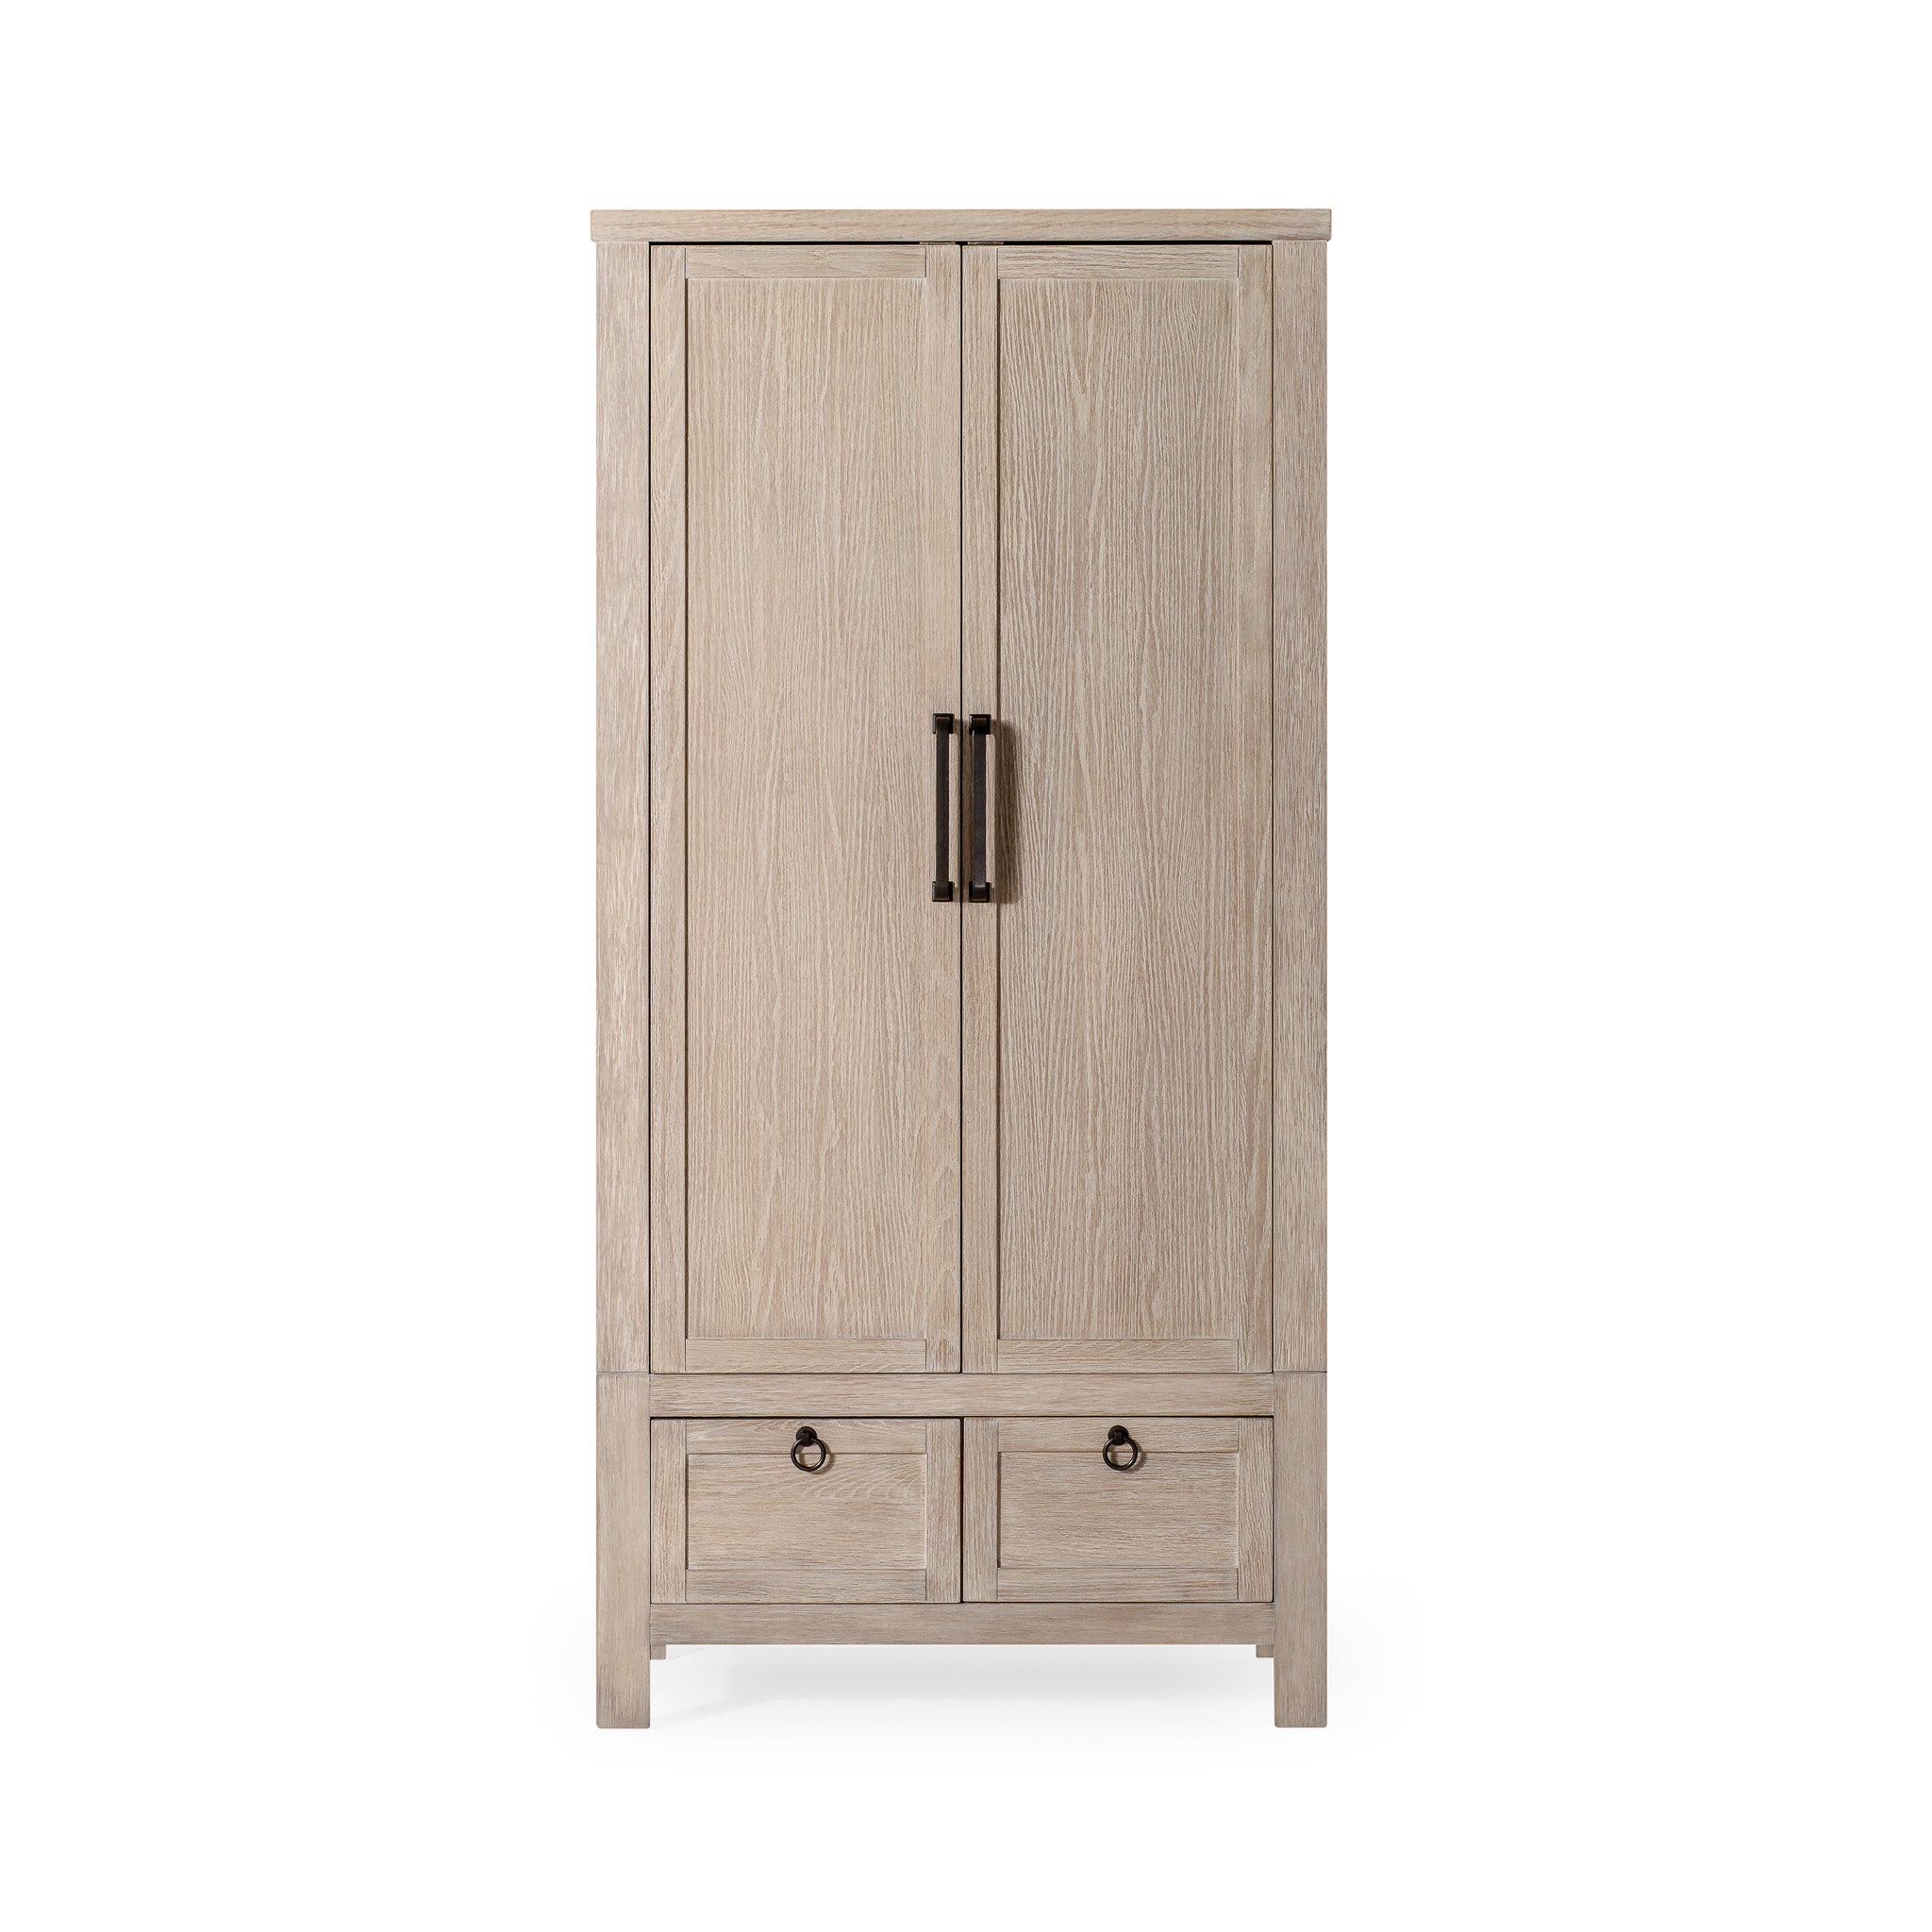 Vaughn Organic Wooden Cabinet in Weathered White Finish in Cabinets by Maven Lane